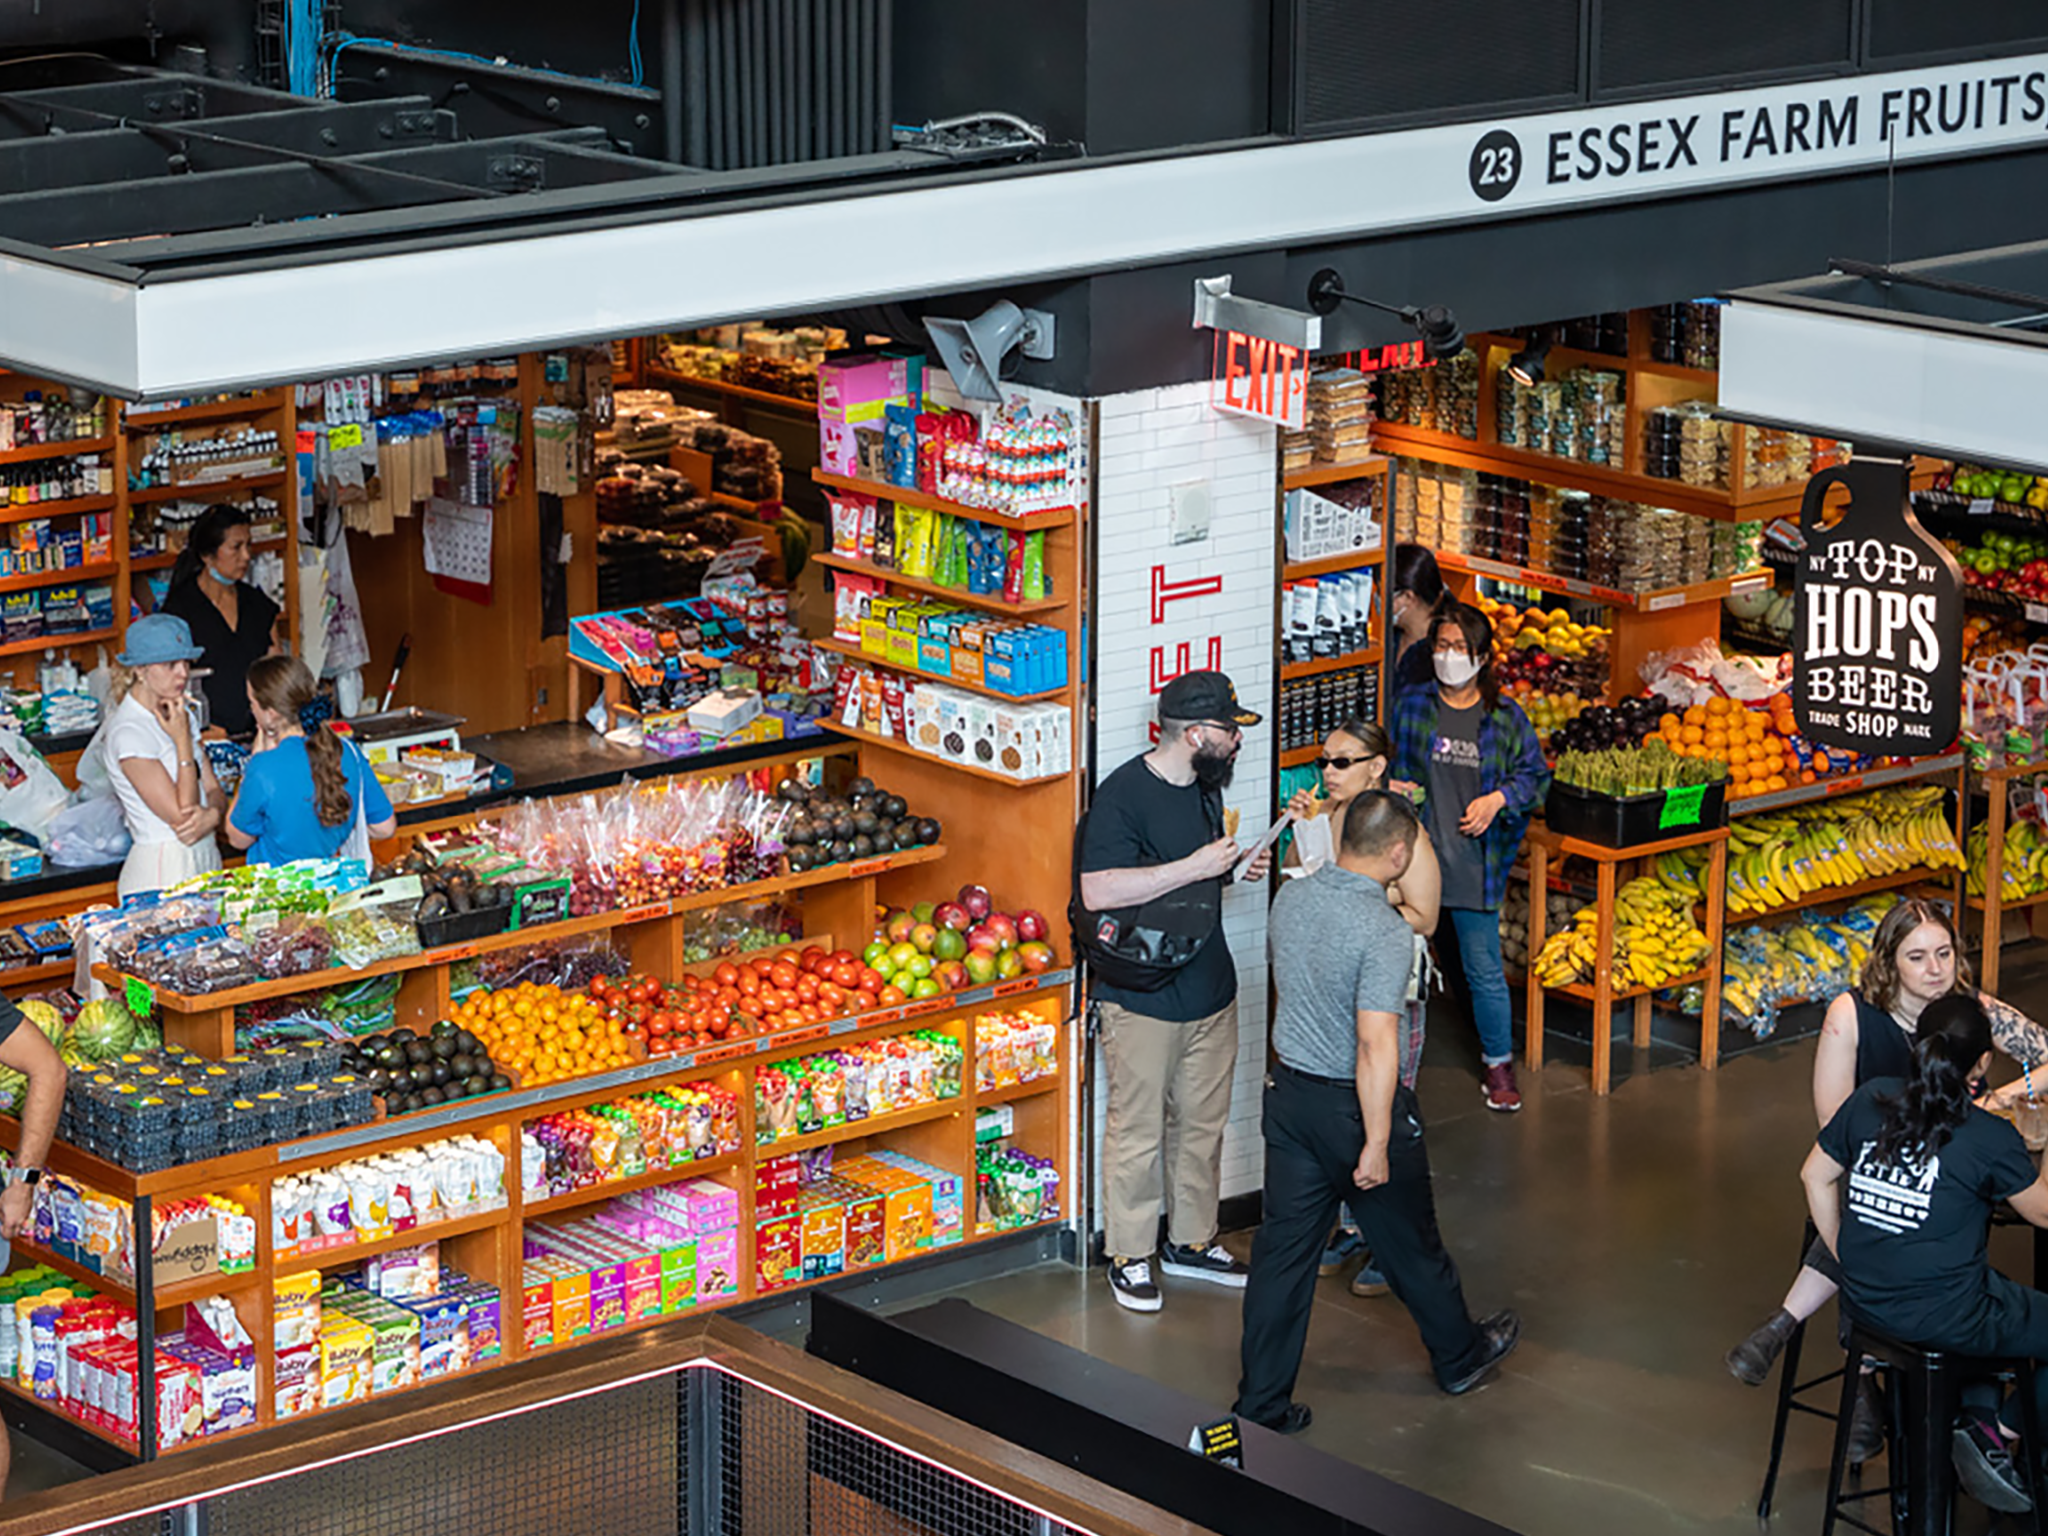 The historic Essex Market originally opened in 1940, and reopened in 2019